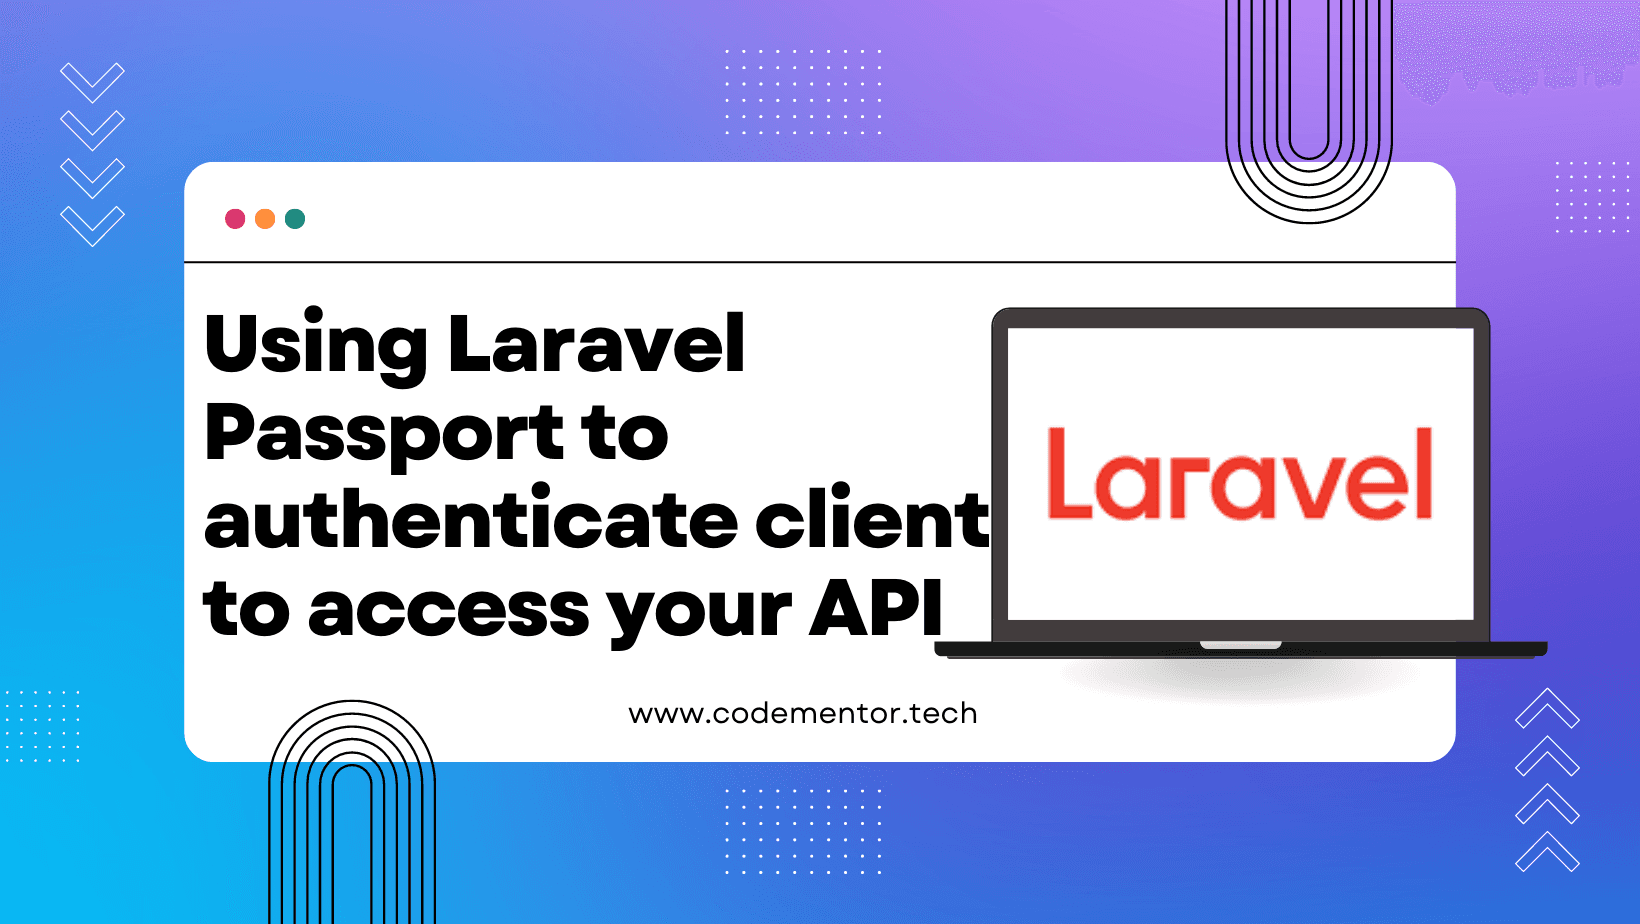 Using laravel passport to authenticate client to access your API - codementor.tech